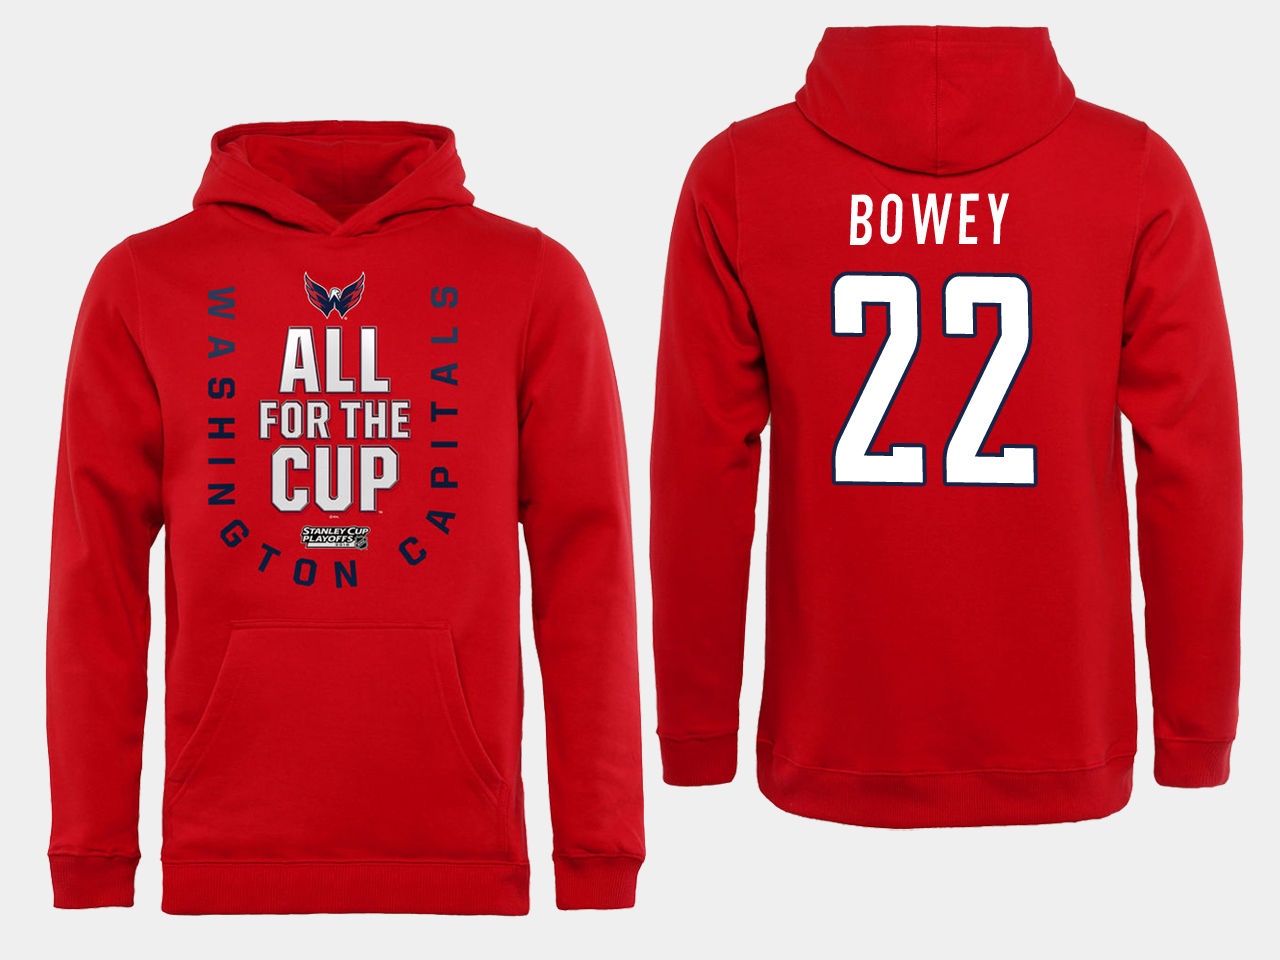 Men NHL Washington Capitals #22 Bowey Red All for the Cup Hoodie->washington capitals->NHL Jersey